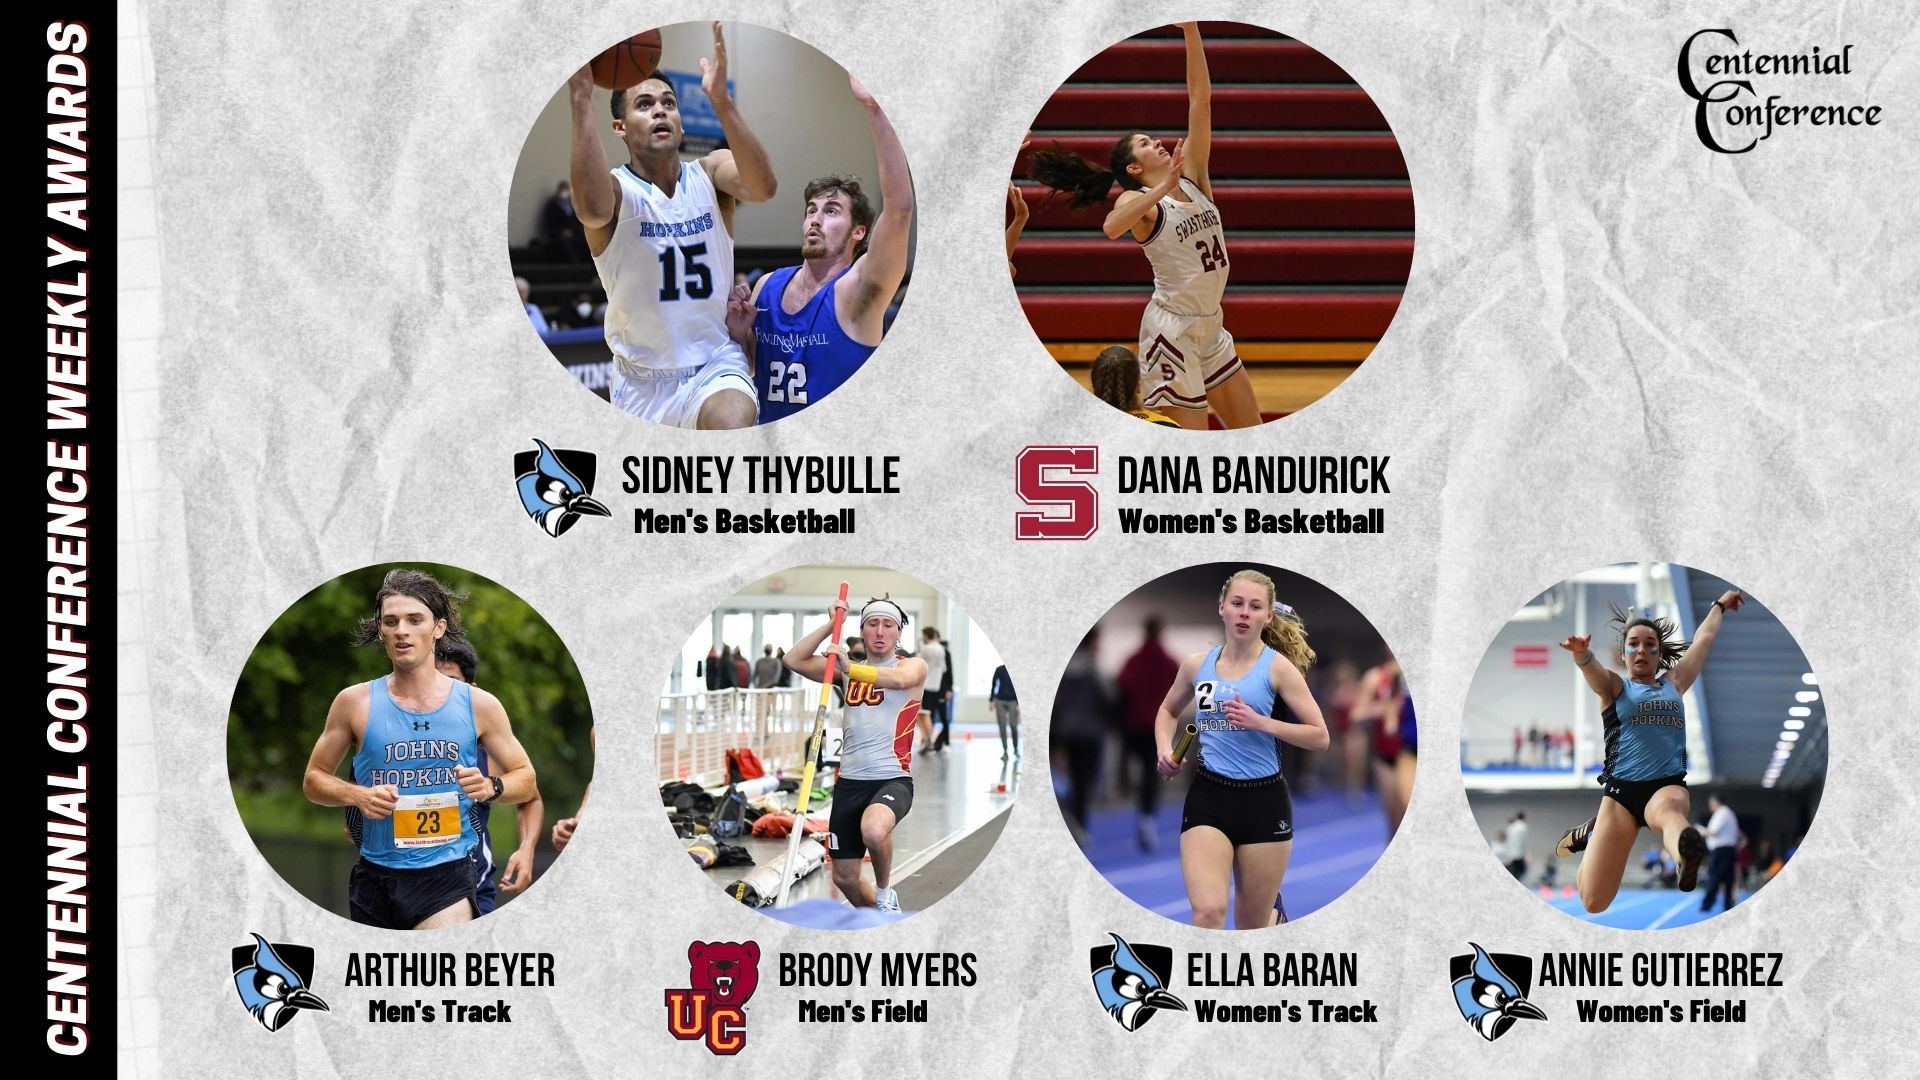 Centennial Conference Athletes of the Week - Feb. 7-13